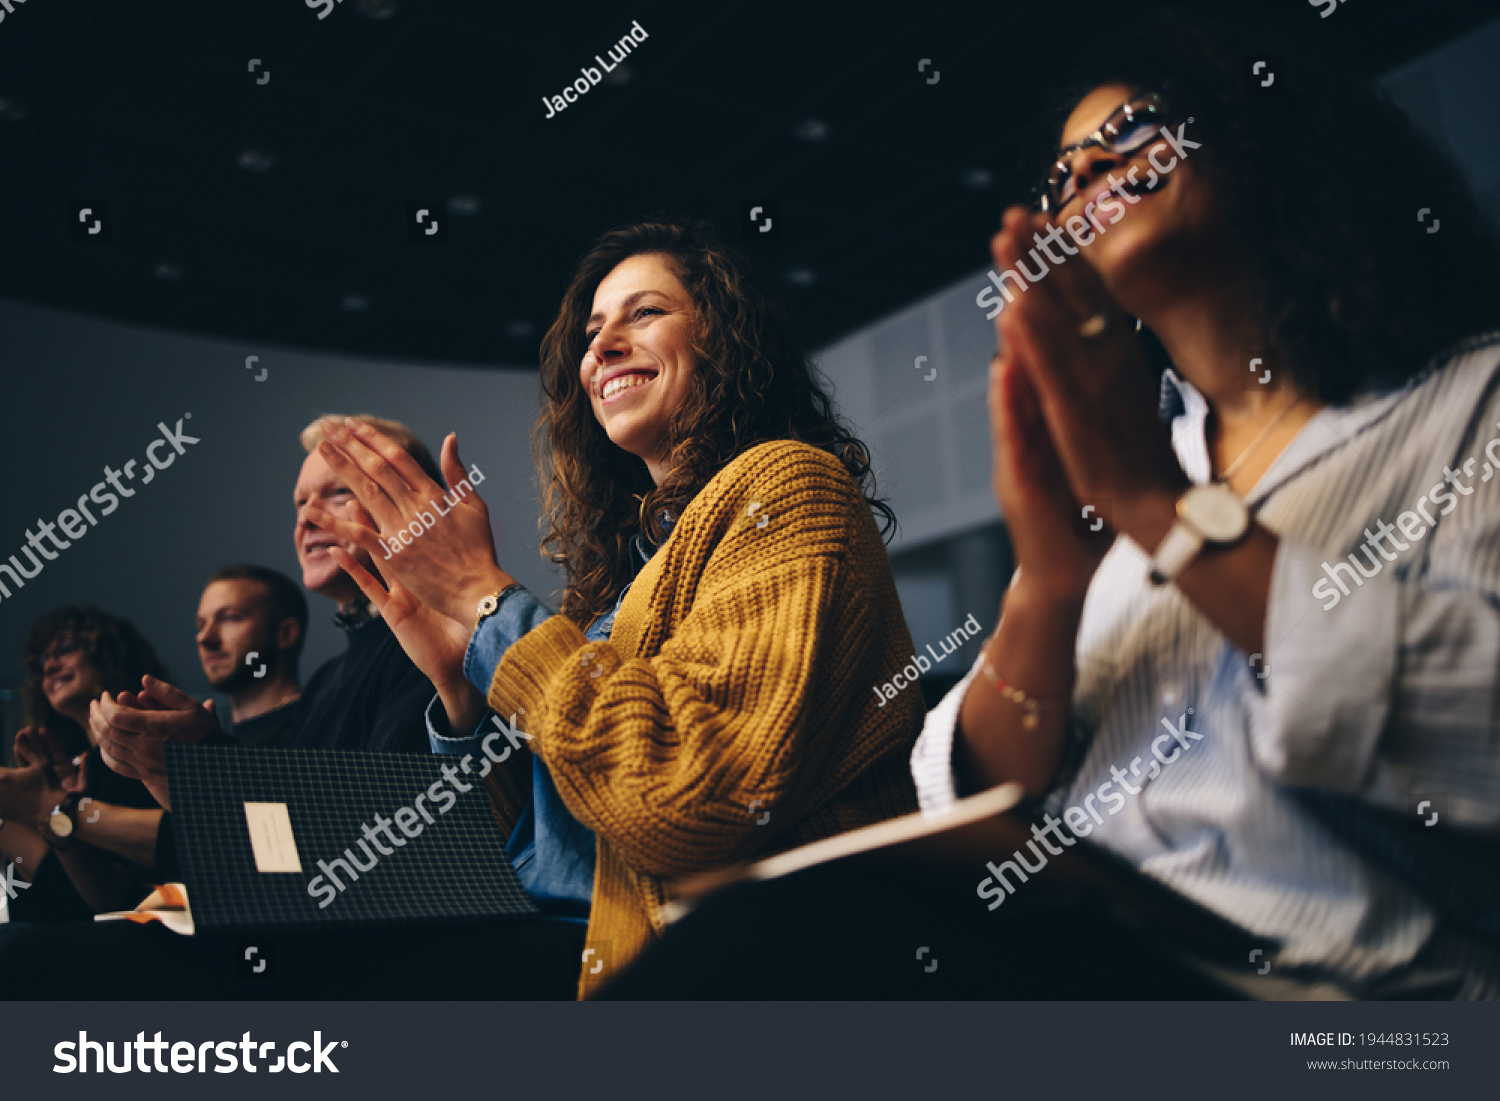 Audience listening to the speech and clapping hands. Group of business people attending a convention applauding during the forum. #1944831523